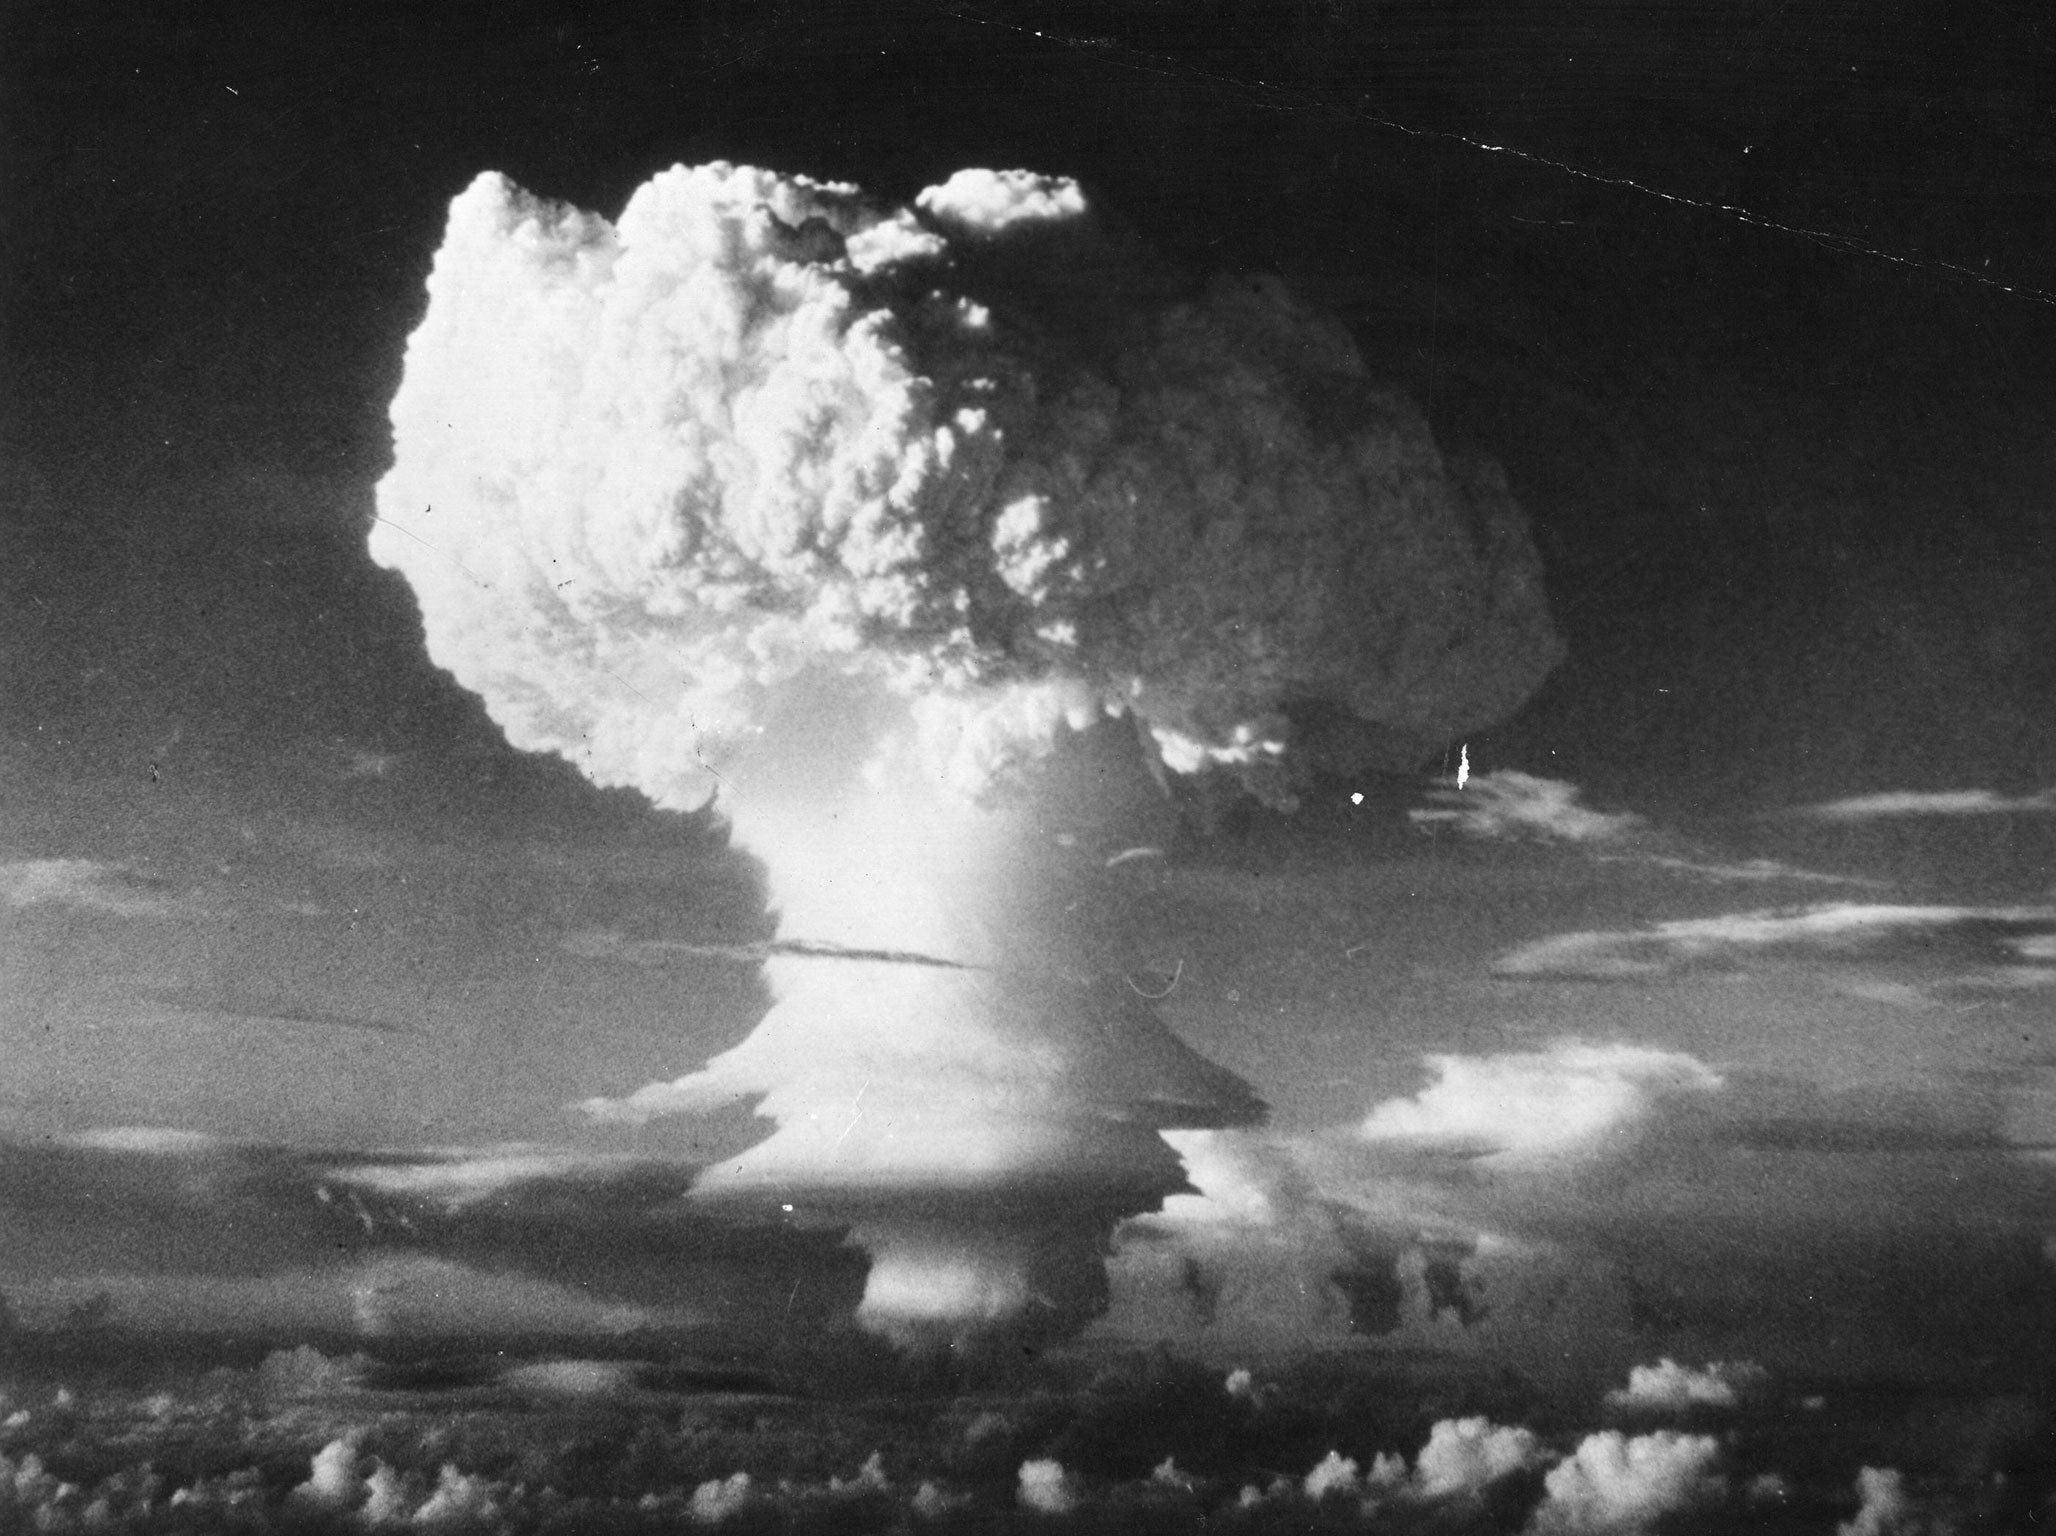 6th November 1952: Characteristic mushroom shaped cloud begins formation after the first H-Bomb explosion (US) at Eniwetok Atoll in the Pacific